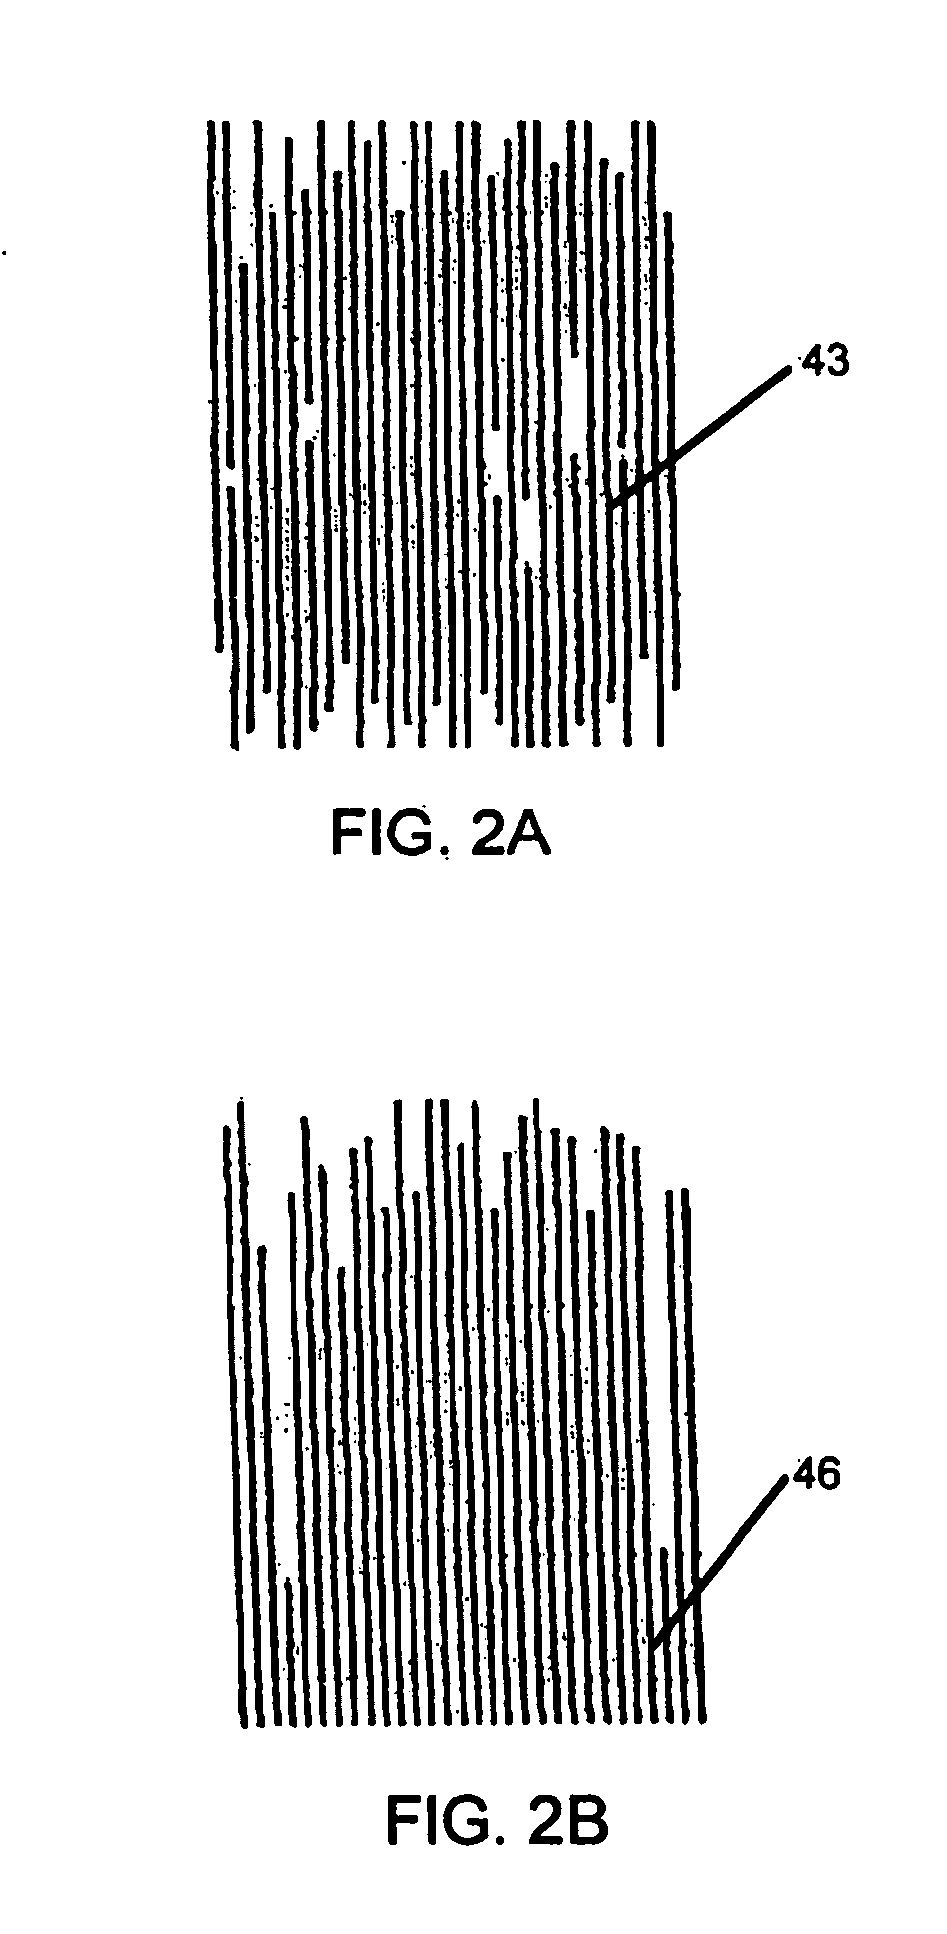 Automatic fiber processing system including method and apparatus for producing end-aligned fiber samples